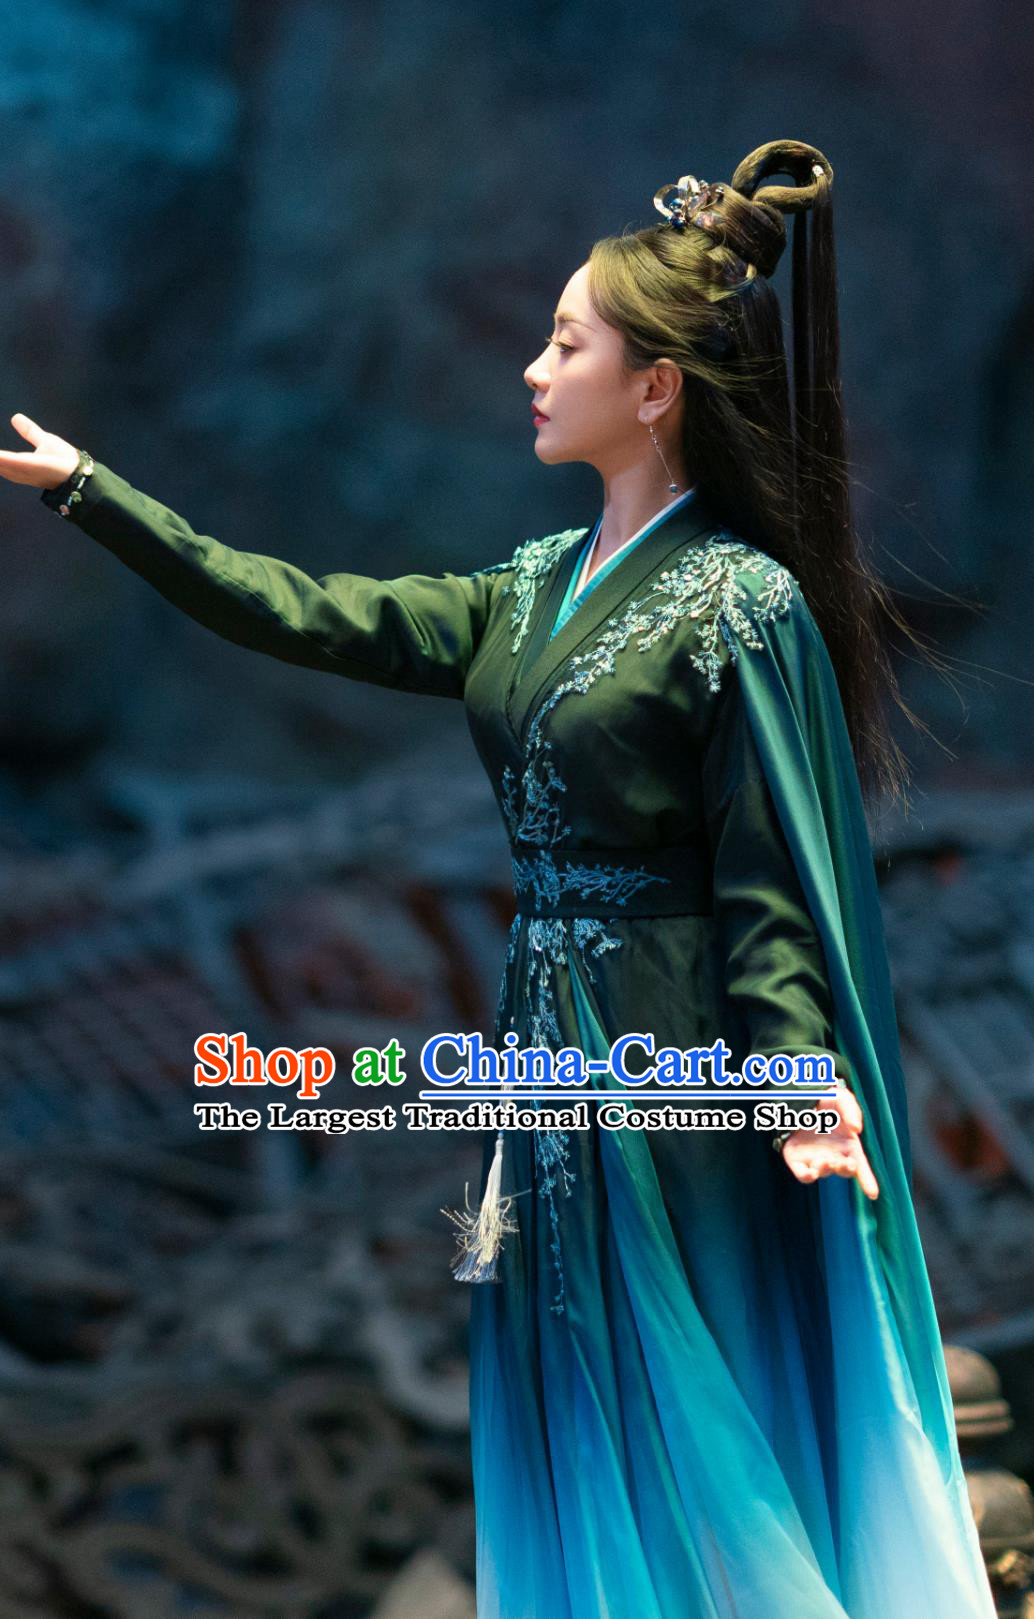 Ancient Chinese Superheroine Clothing China TV Series Back From The Brink the Leader of the Guan Han Sect Su Ying Costumes